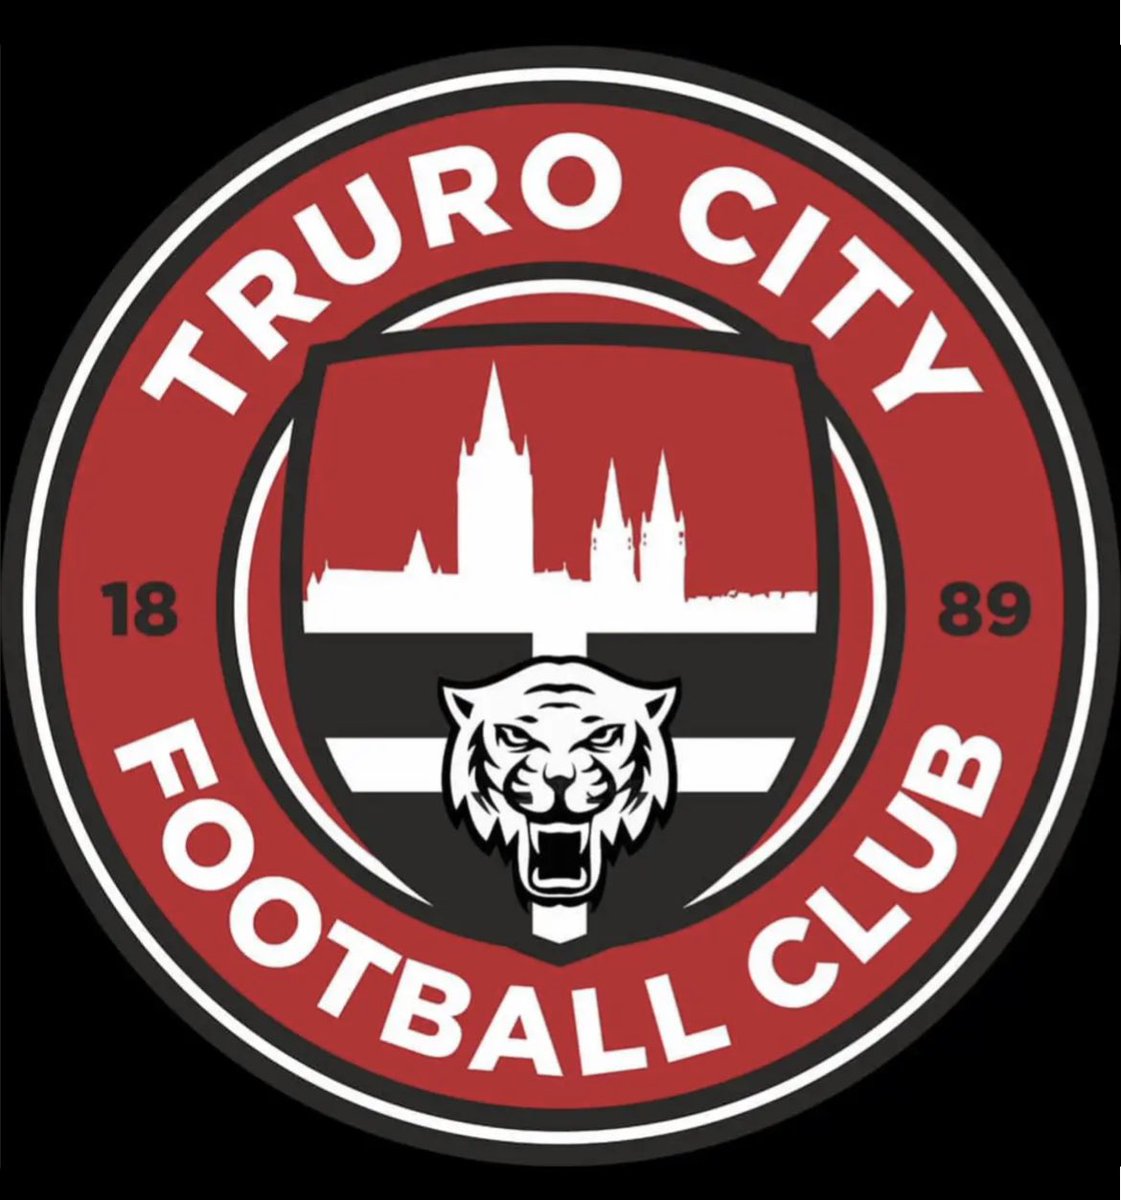 Up the Truro… what a badge that is 😍